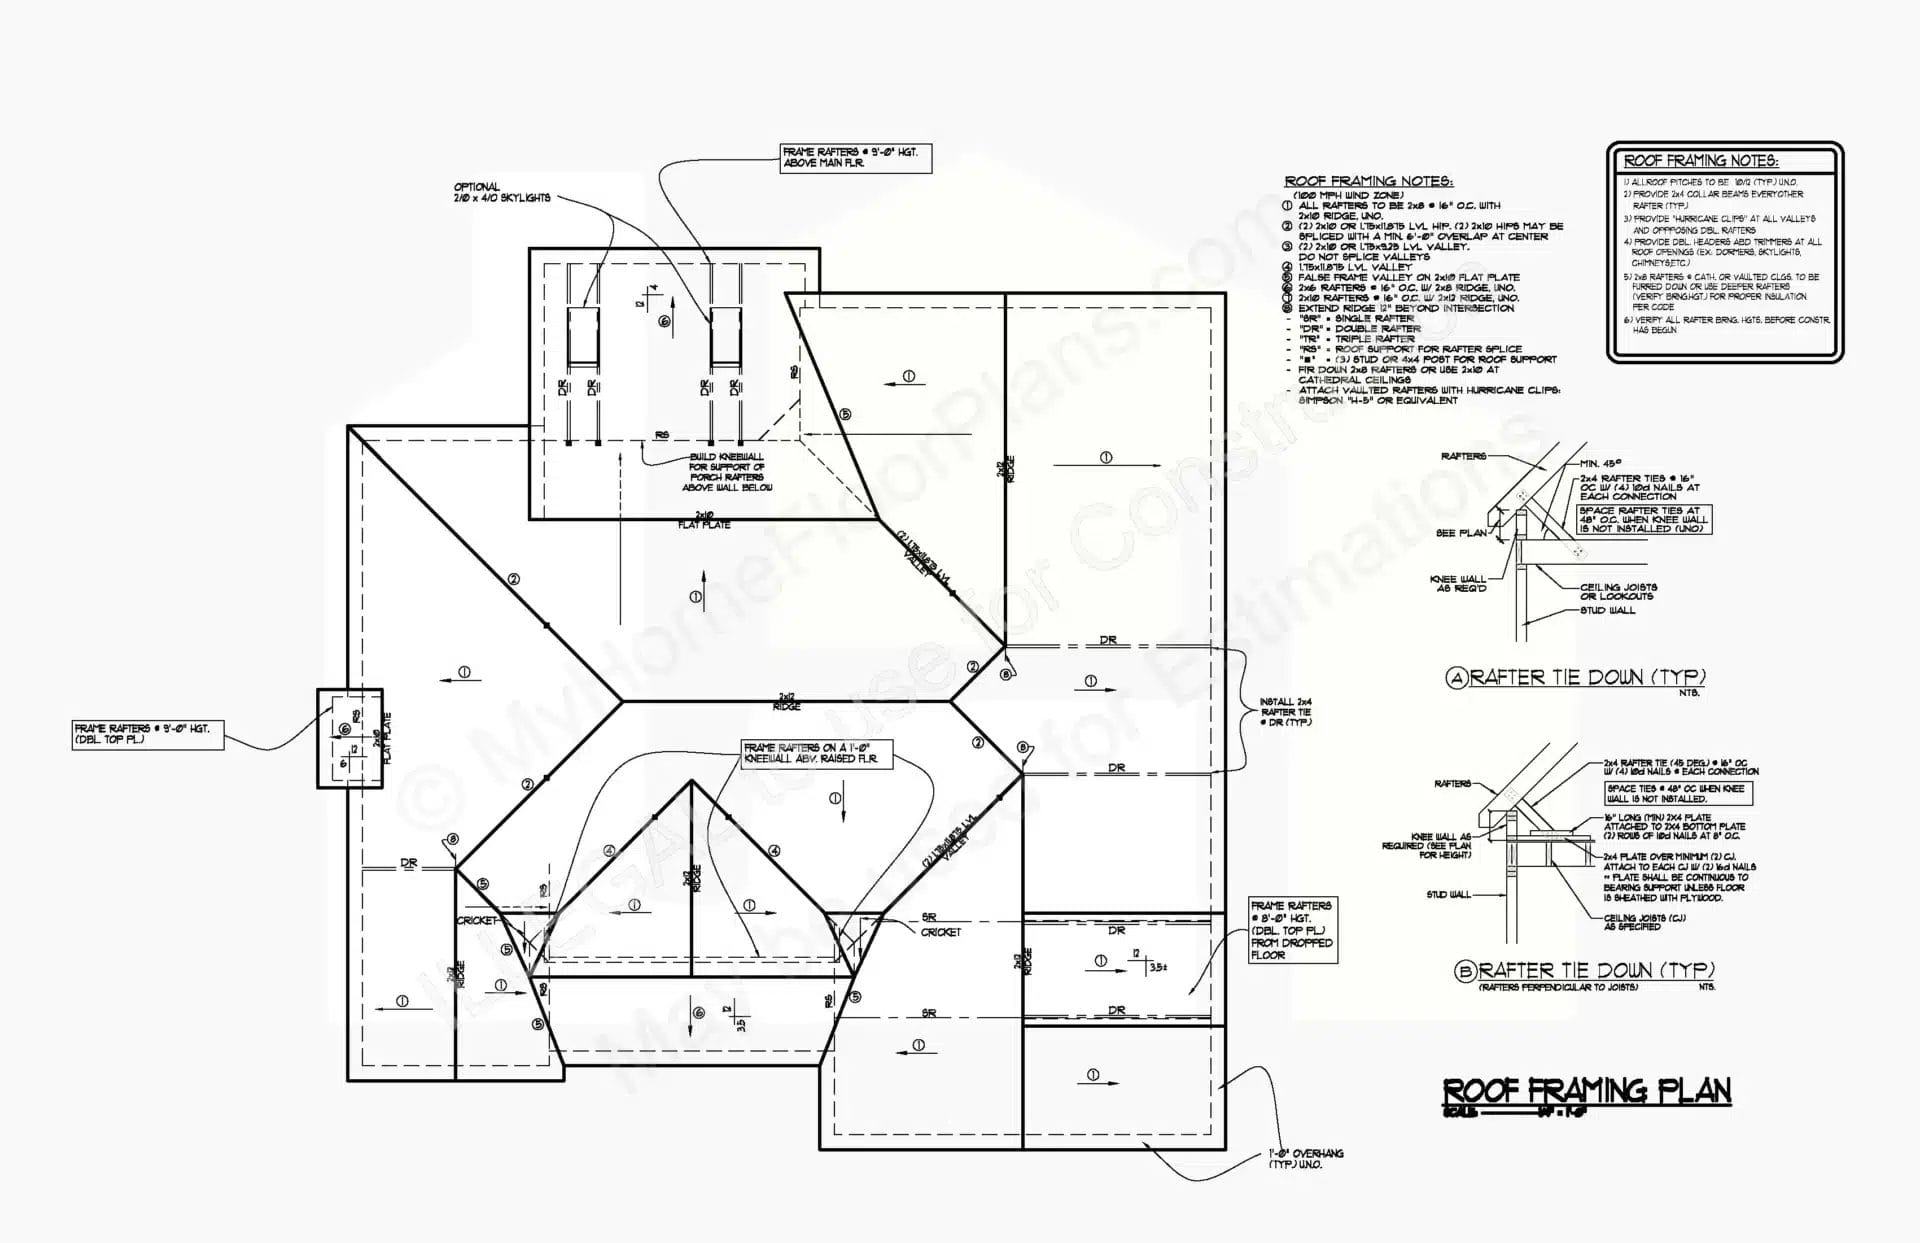 An architectural blueprint of a 12-2289 floor framing plan, featuring detailed line drawings of roof sections, structural elements, annotations, and dimensions, with various notes and scale references on a white background.